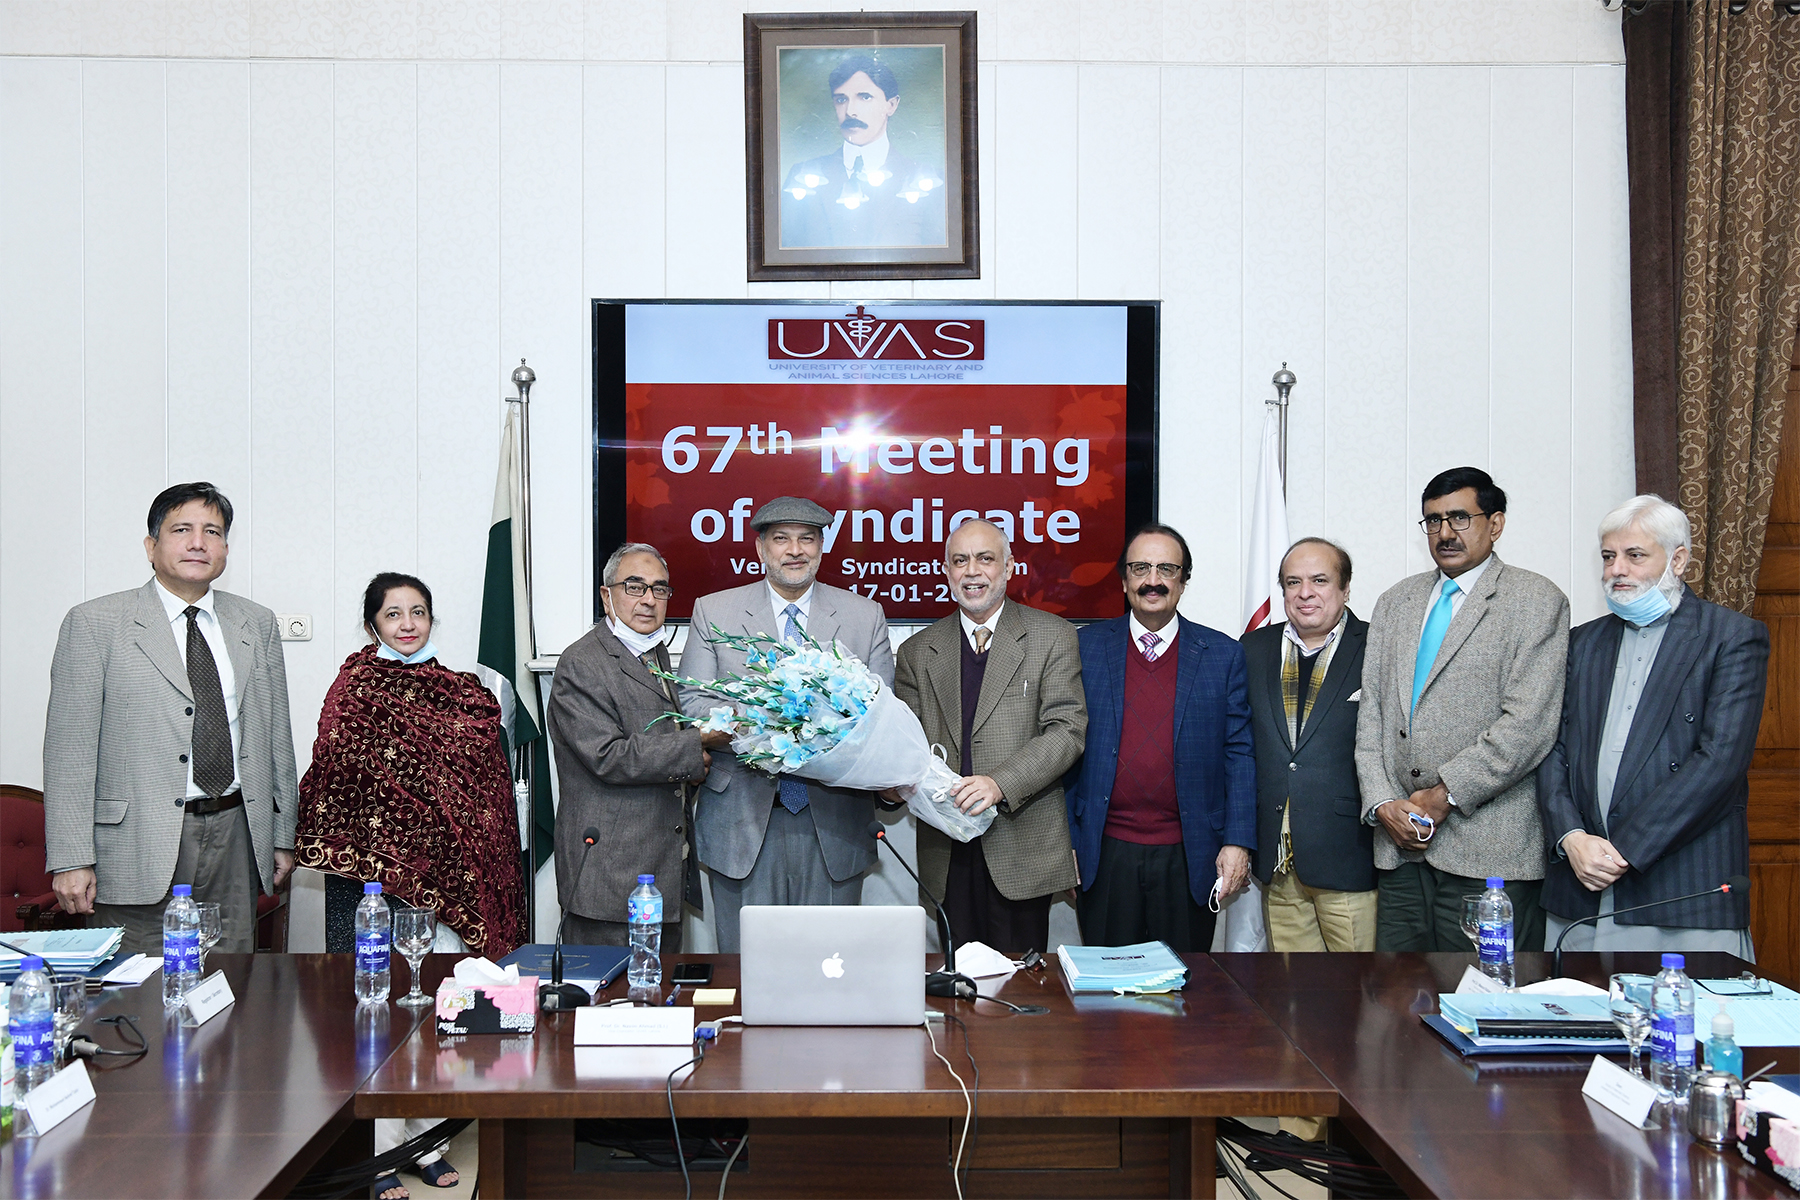 67th meeting of syndicate held at UVAS